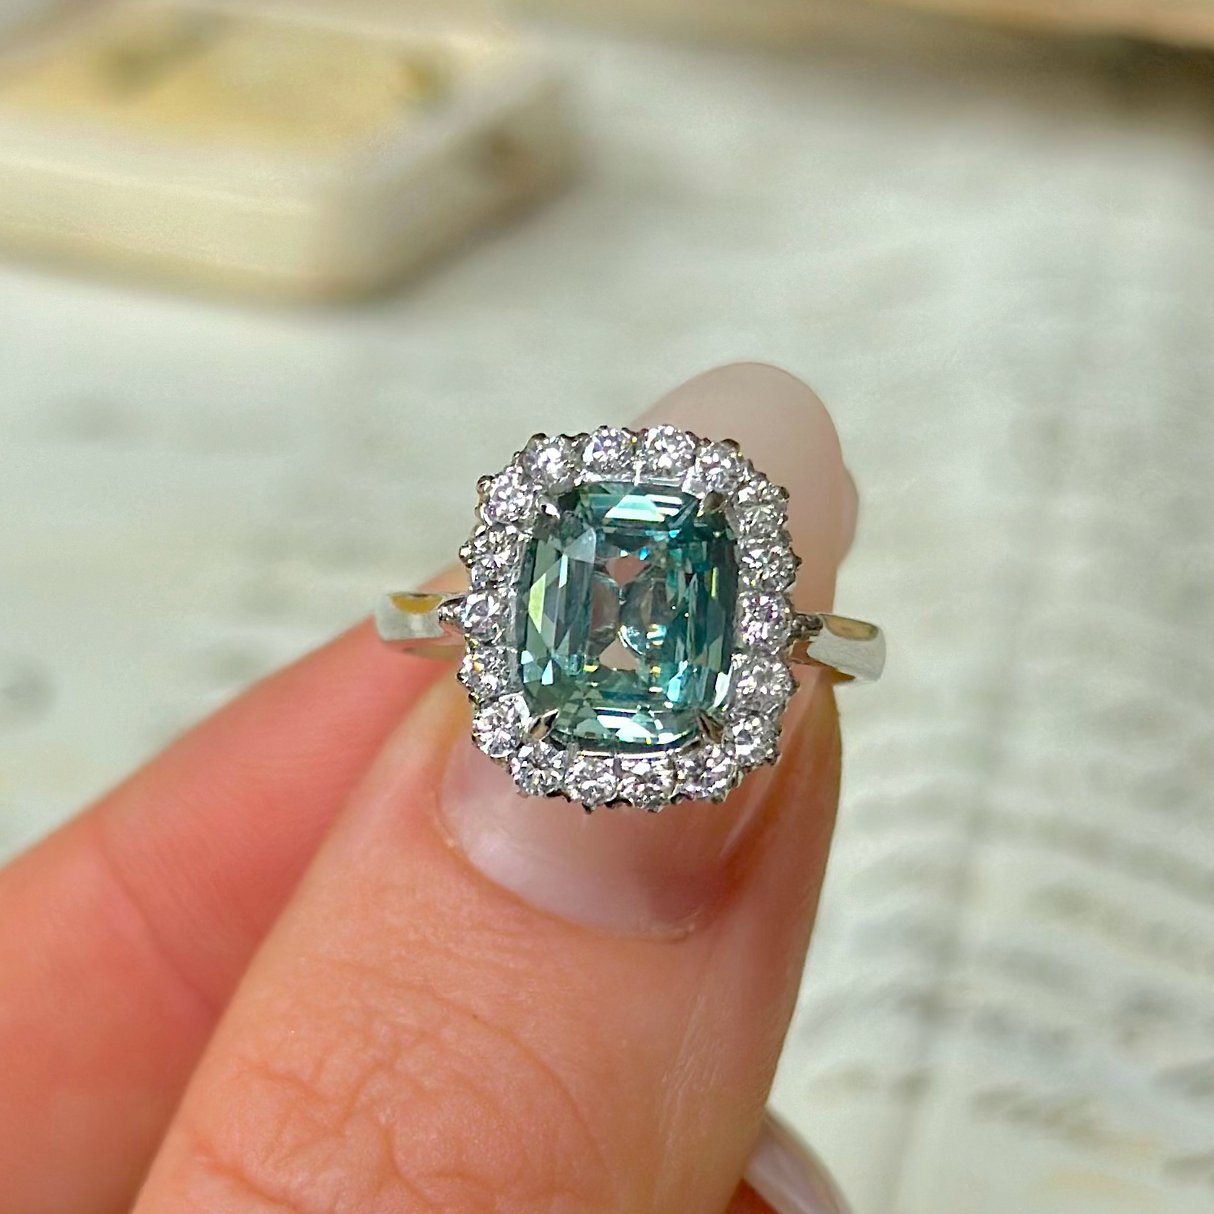 Vintage, 1960s Teal Sapphire and Diamond Square Cluster Ring, 18ct White Gold worn on finger.